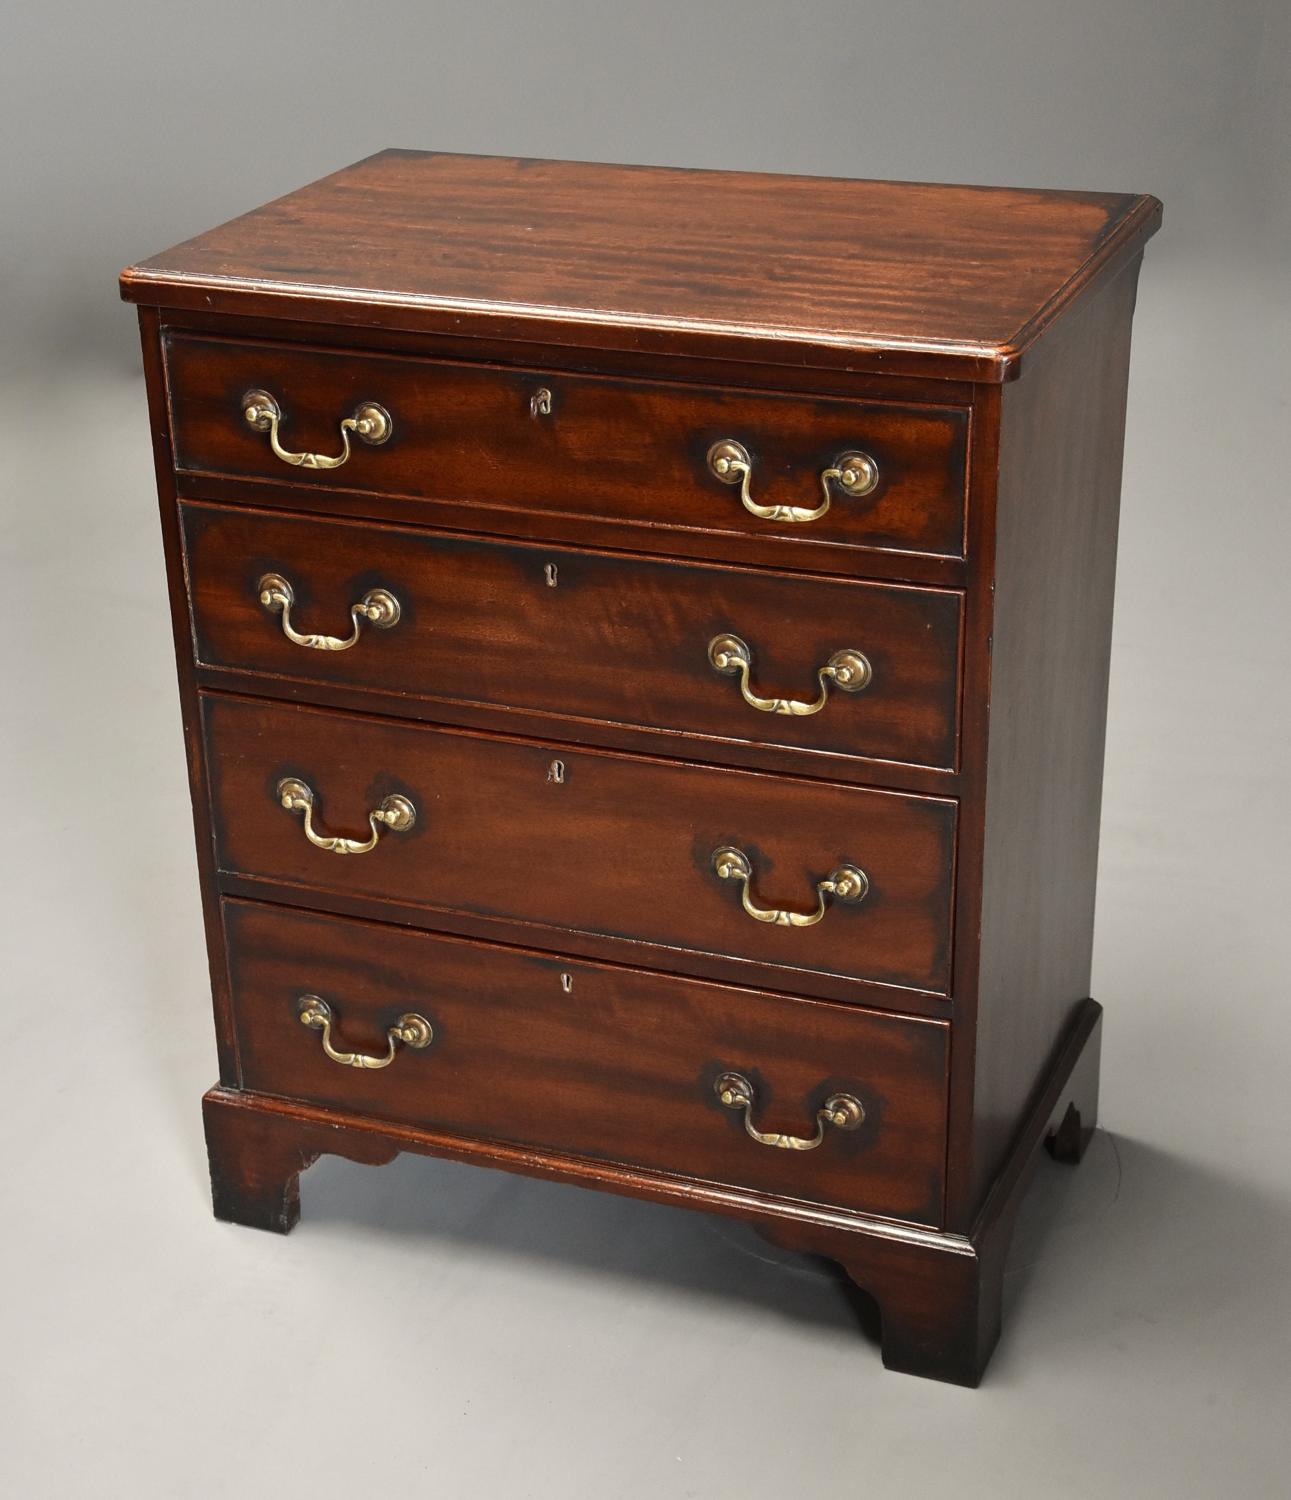 Late 19th century mahogany chest of drawers of small proportions